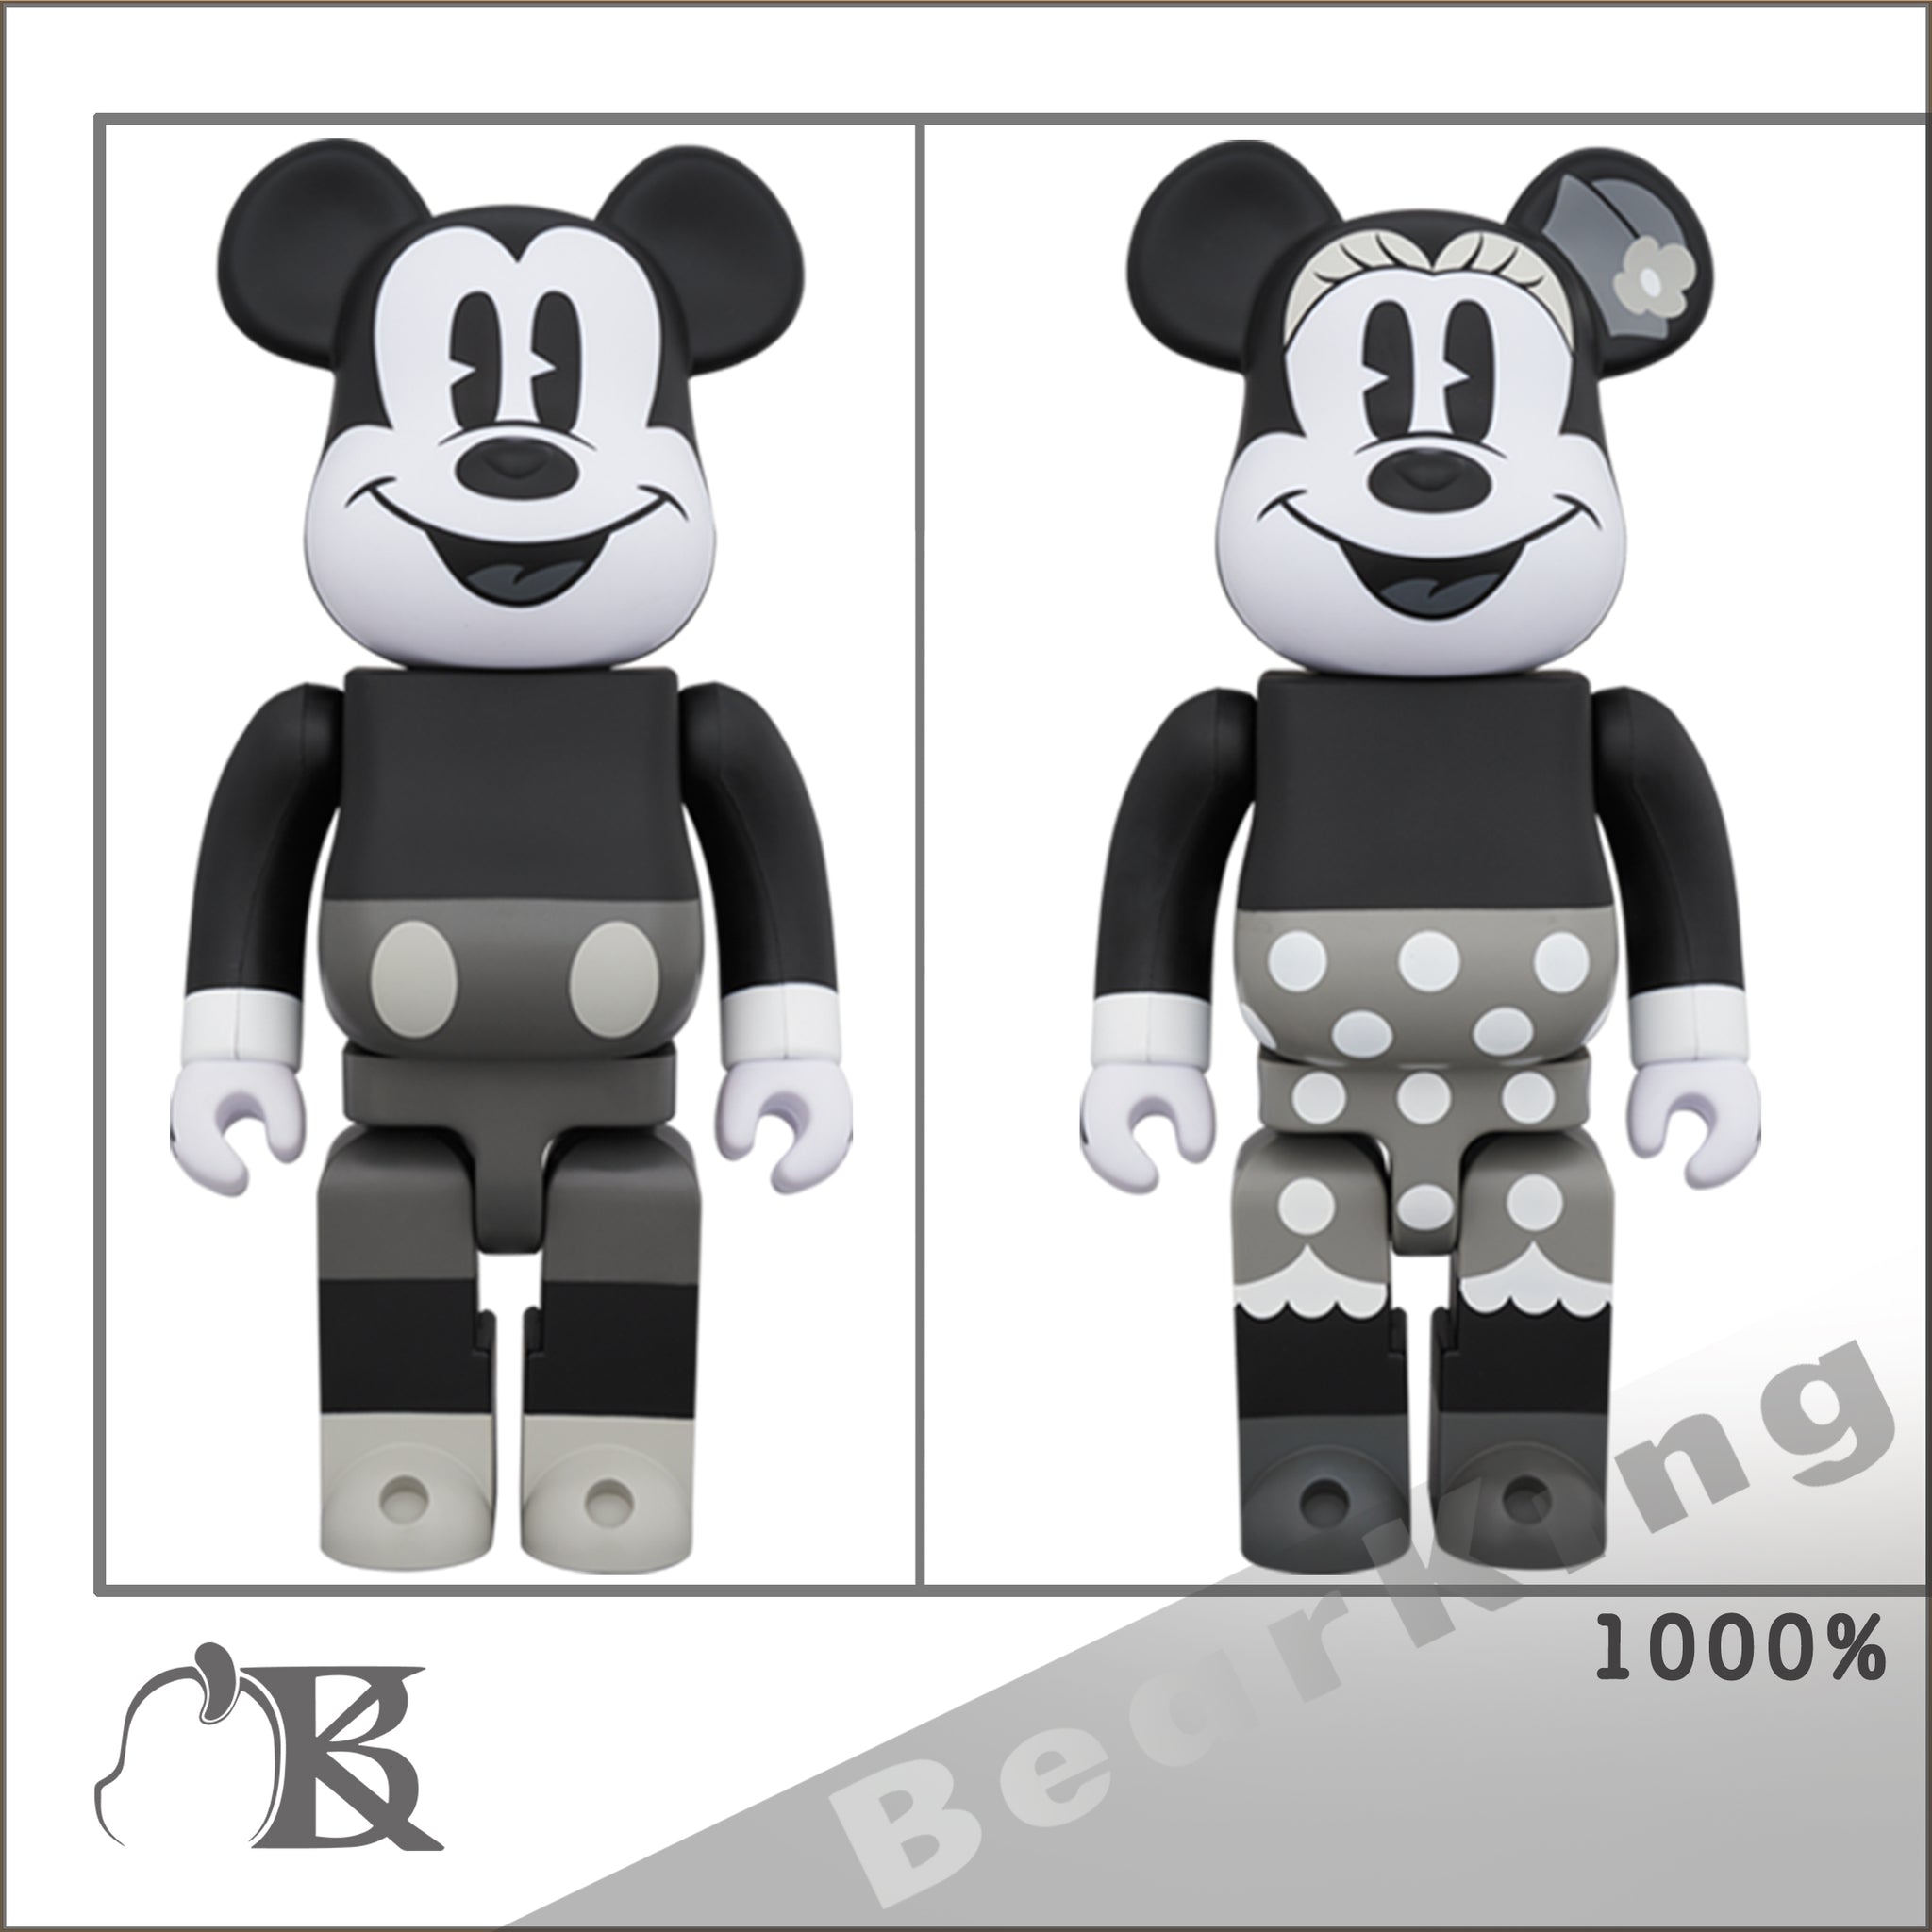 BE@RBRICK MICKEY MINNIE MOUSE (B&W Ver.) 1000％ 2018 SET of 2